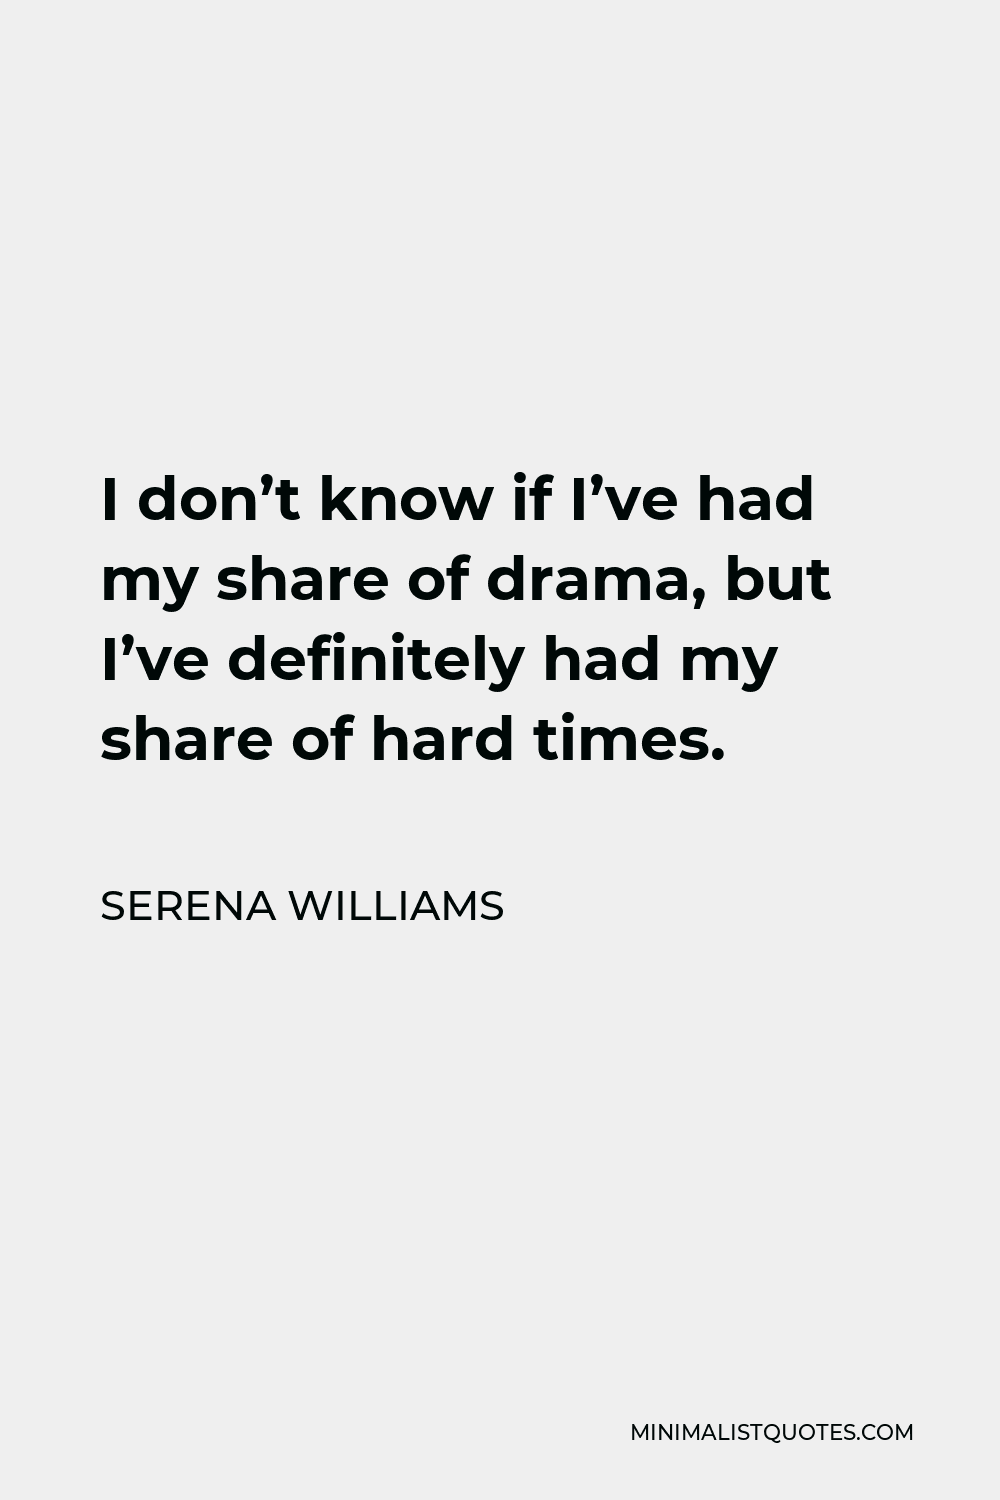 Serena Williams Quote - I don’t know if I’ve had my share of drama, but I’ve definitely had my share of hard times.